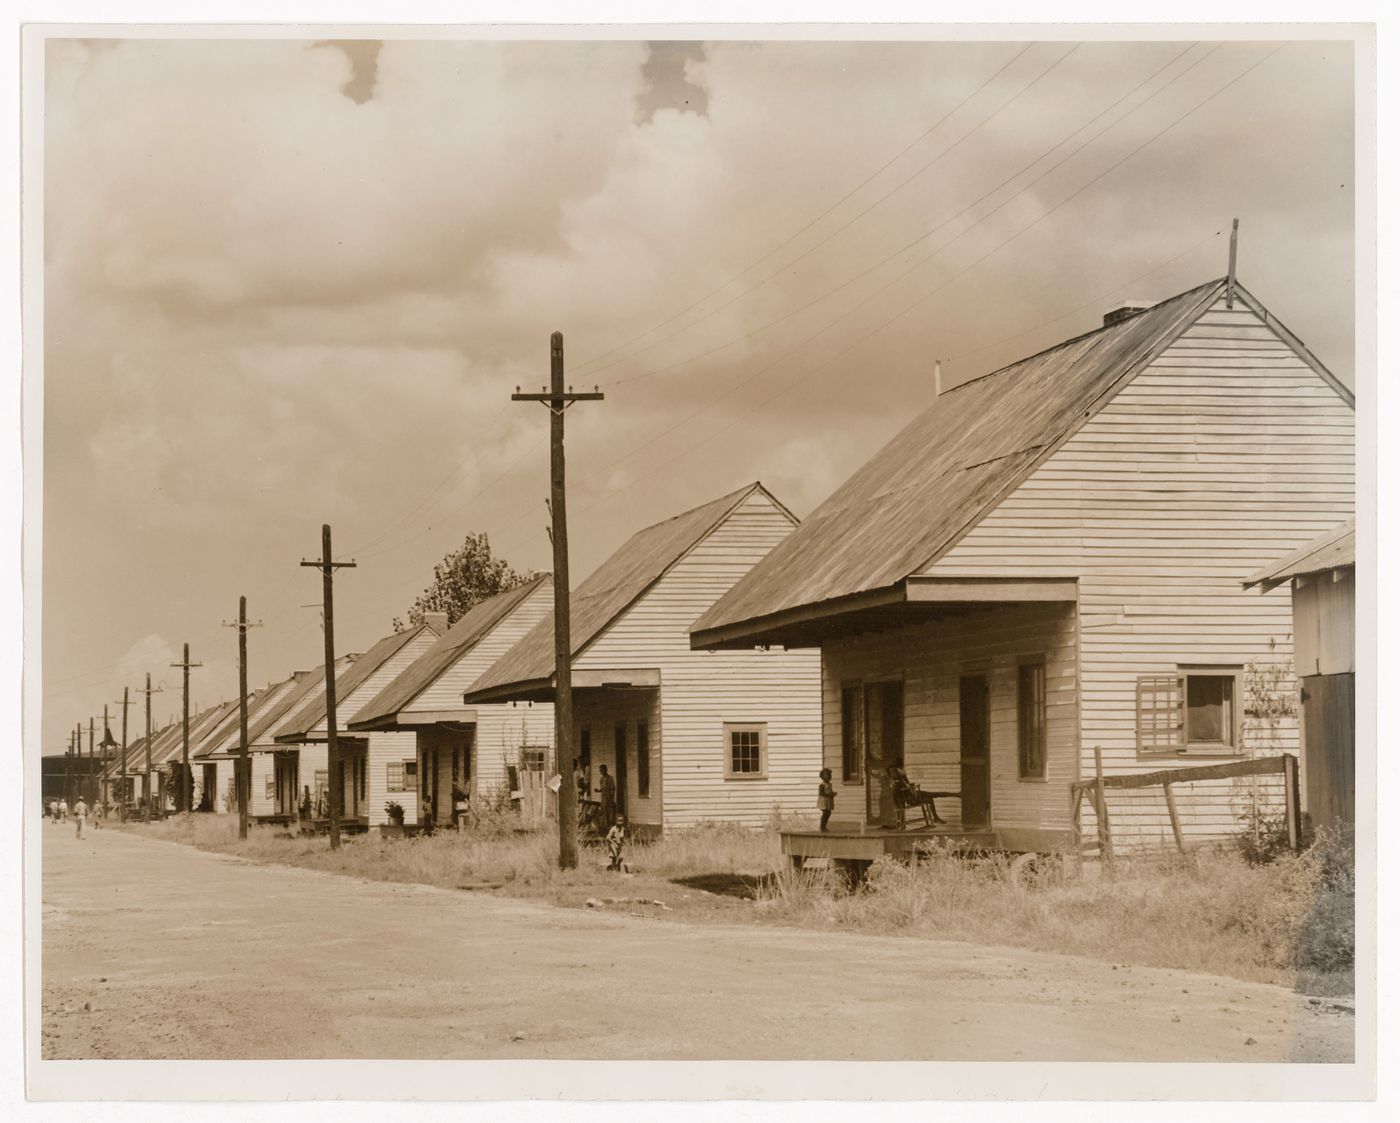 Street view of row of wooden houses with overhangs and porches, near the former Destrehan Plantation, Louisiana, United States